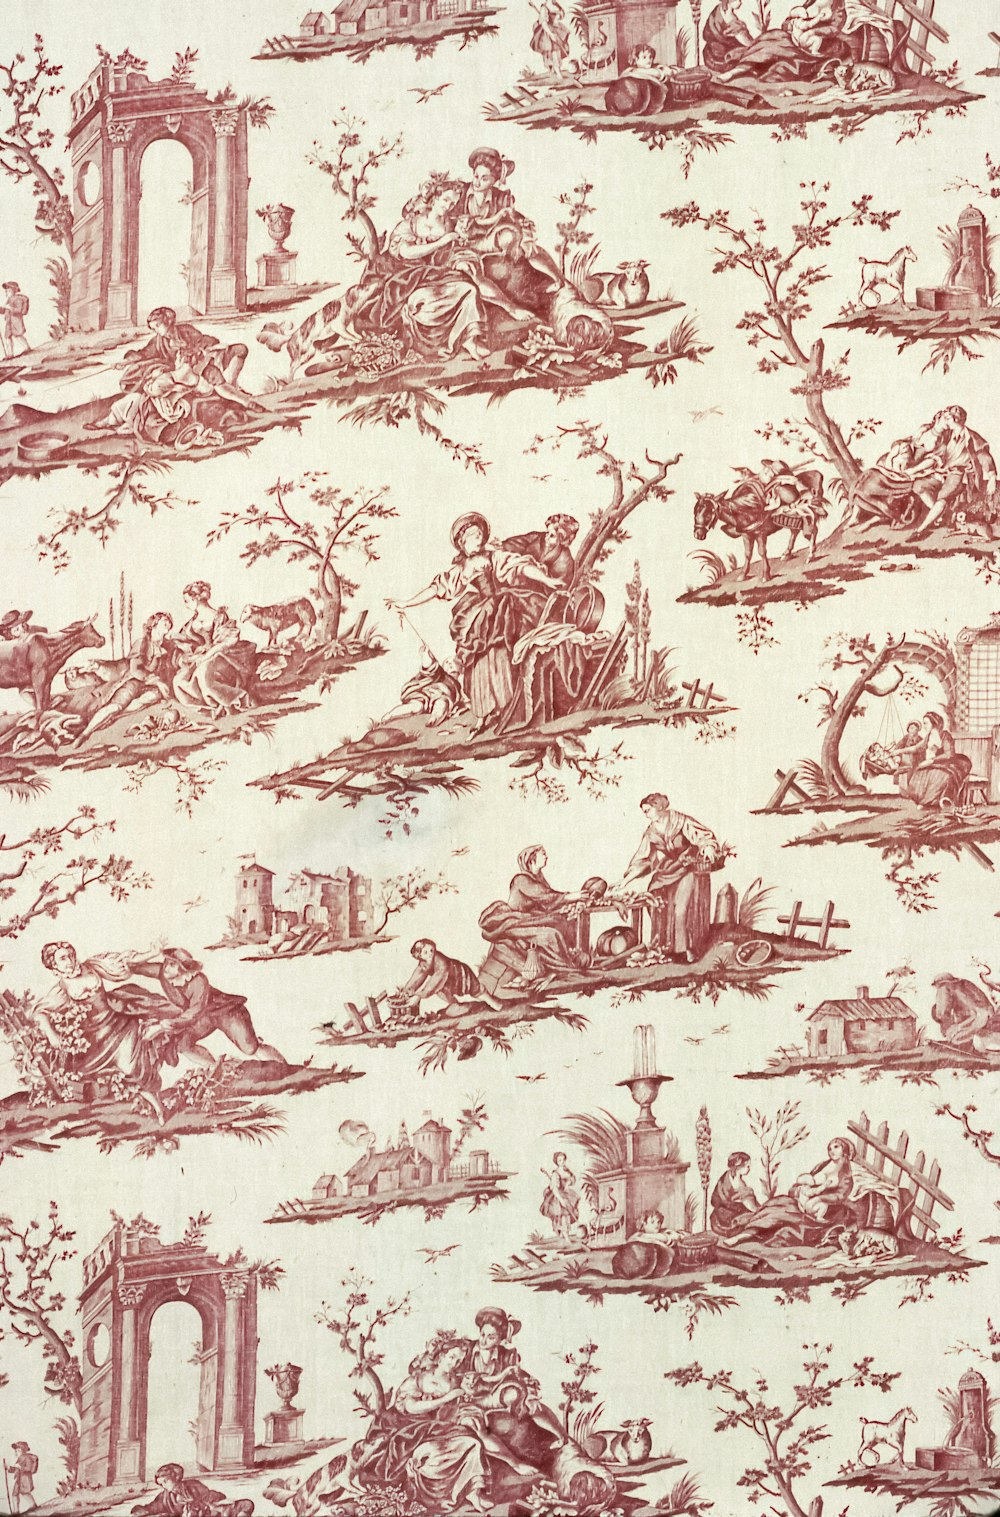 a wallpaper with a pattern of people and animals